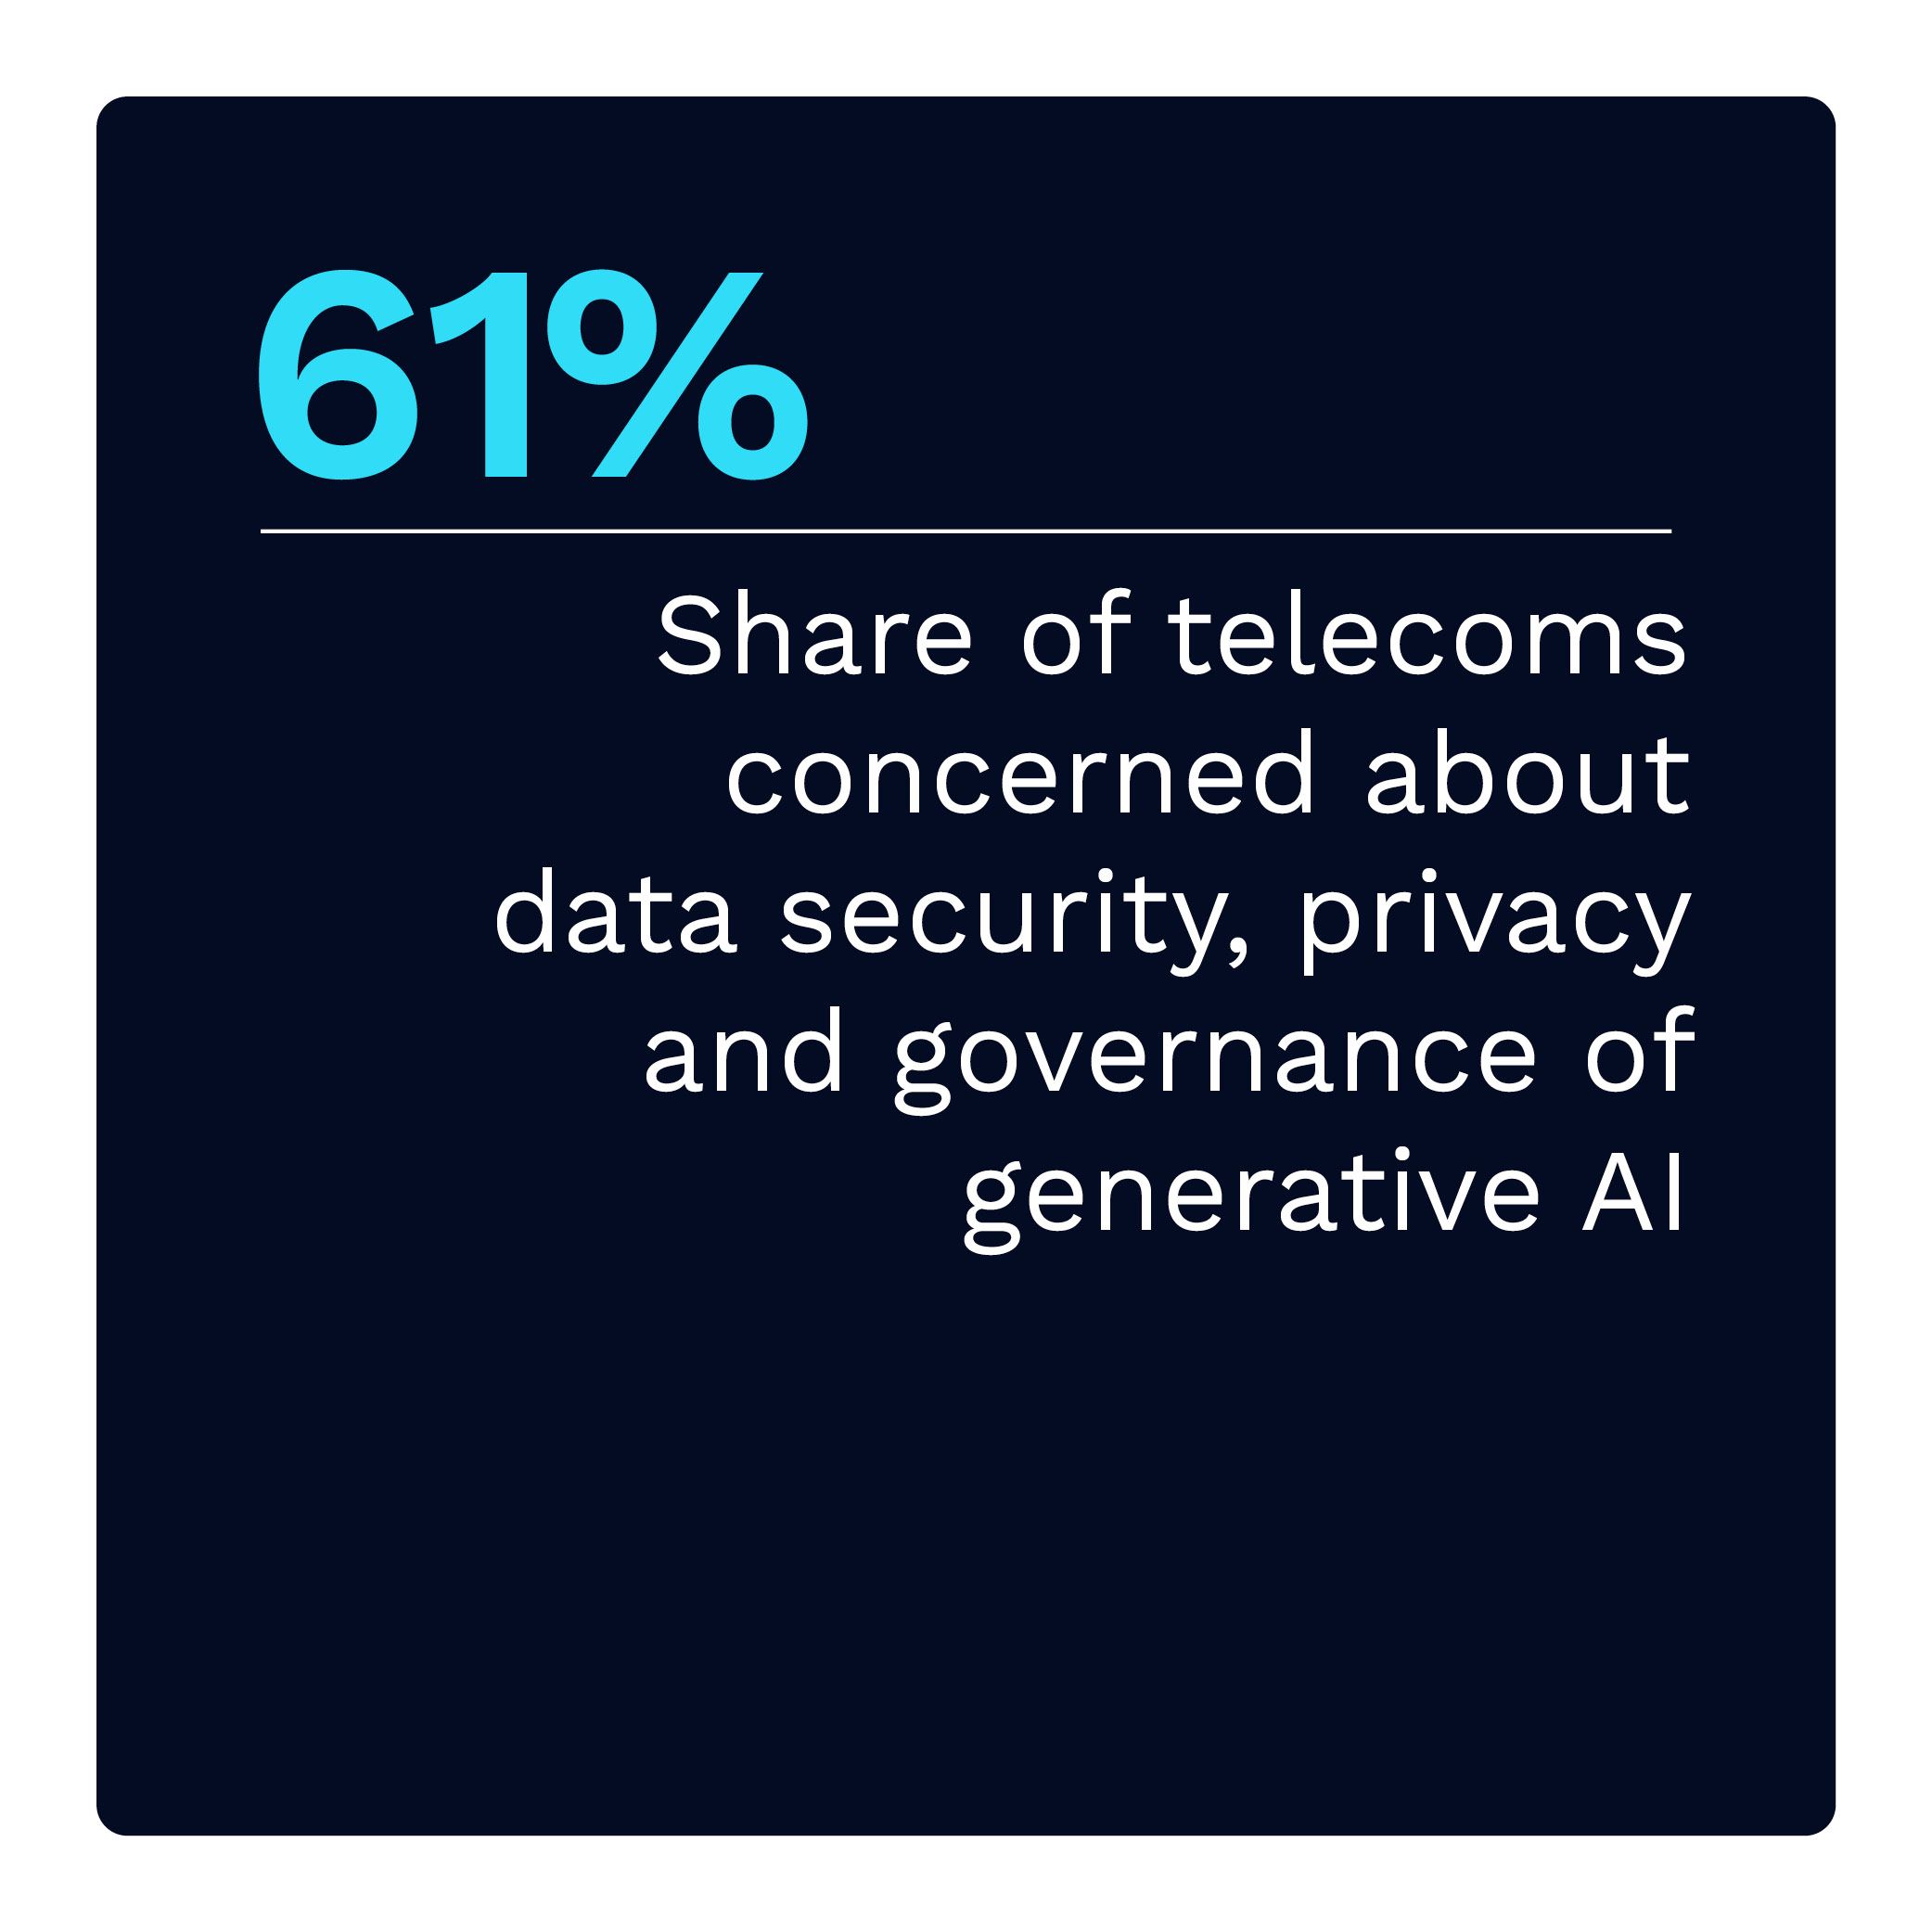 61%: Share of telecoms concerned about data security, privacy and governance of generative AI